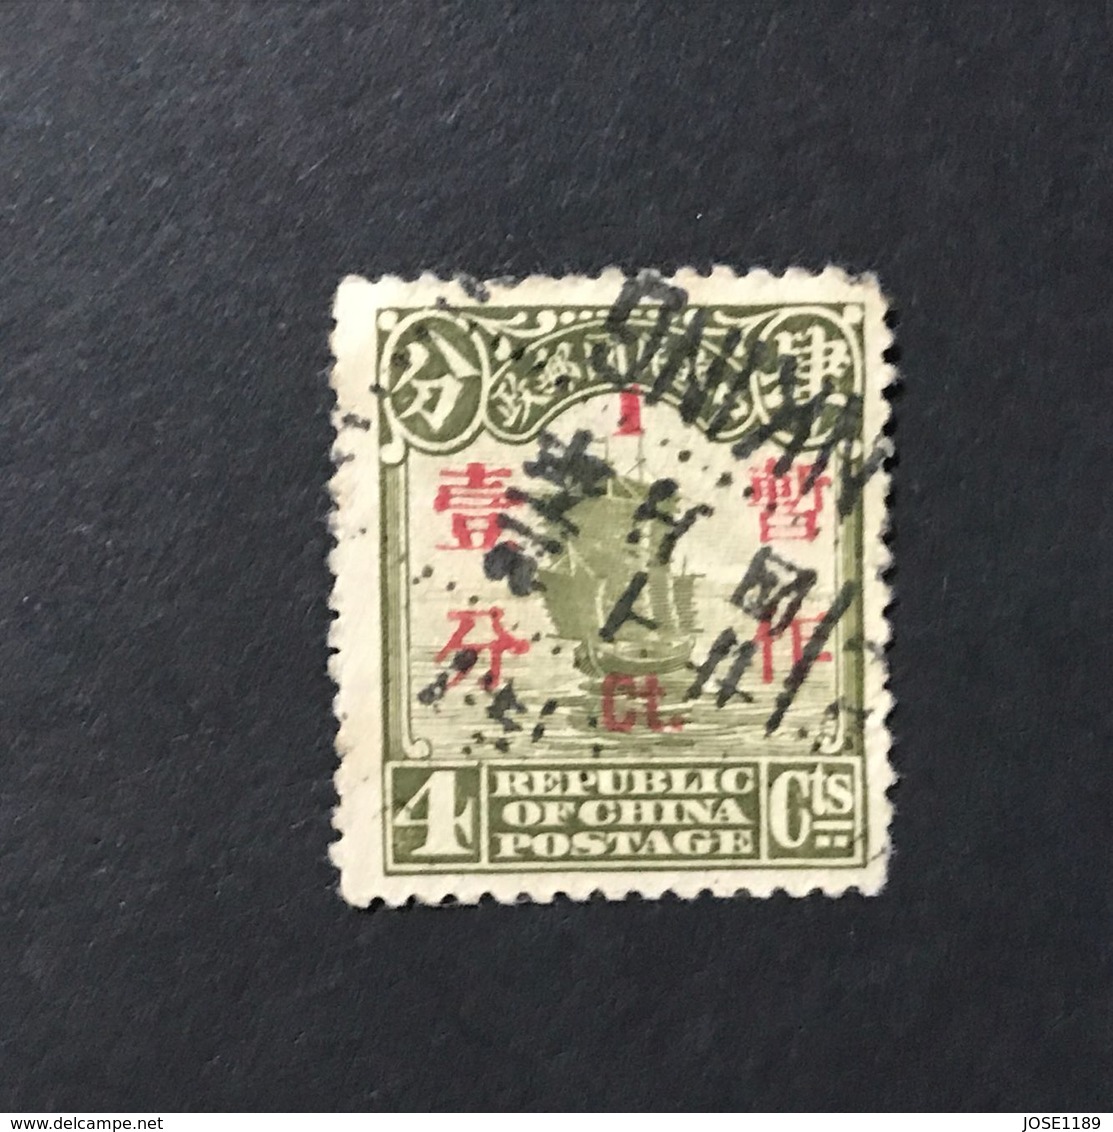 ◆◆◆ CHINA 1933  Surcharges On Junk Series ,Surch In Red.on Junk  Type, 2nd Peking Print  Complete  Used  AA951 - 1912-1949 Repubblica